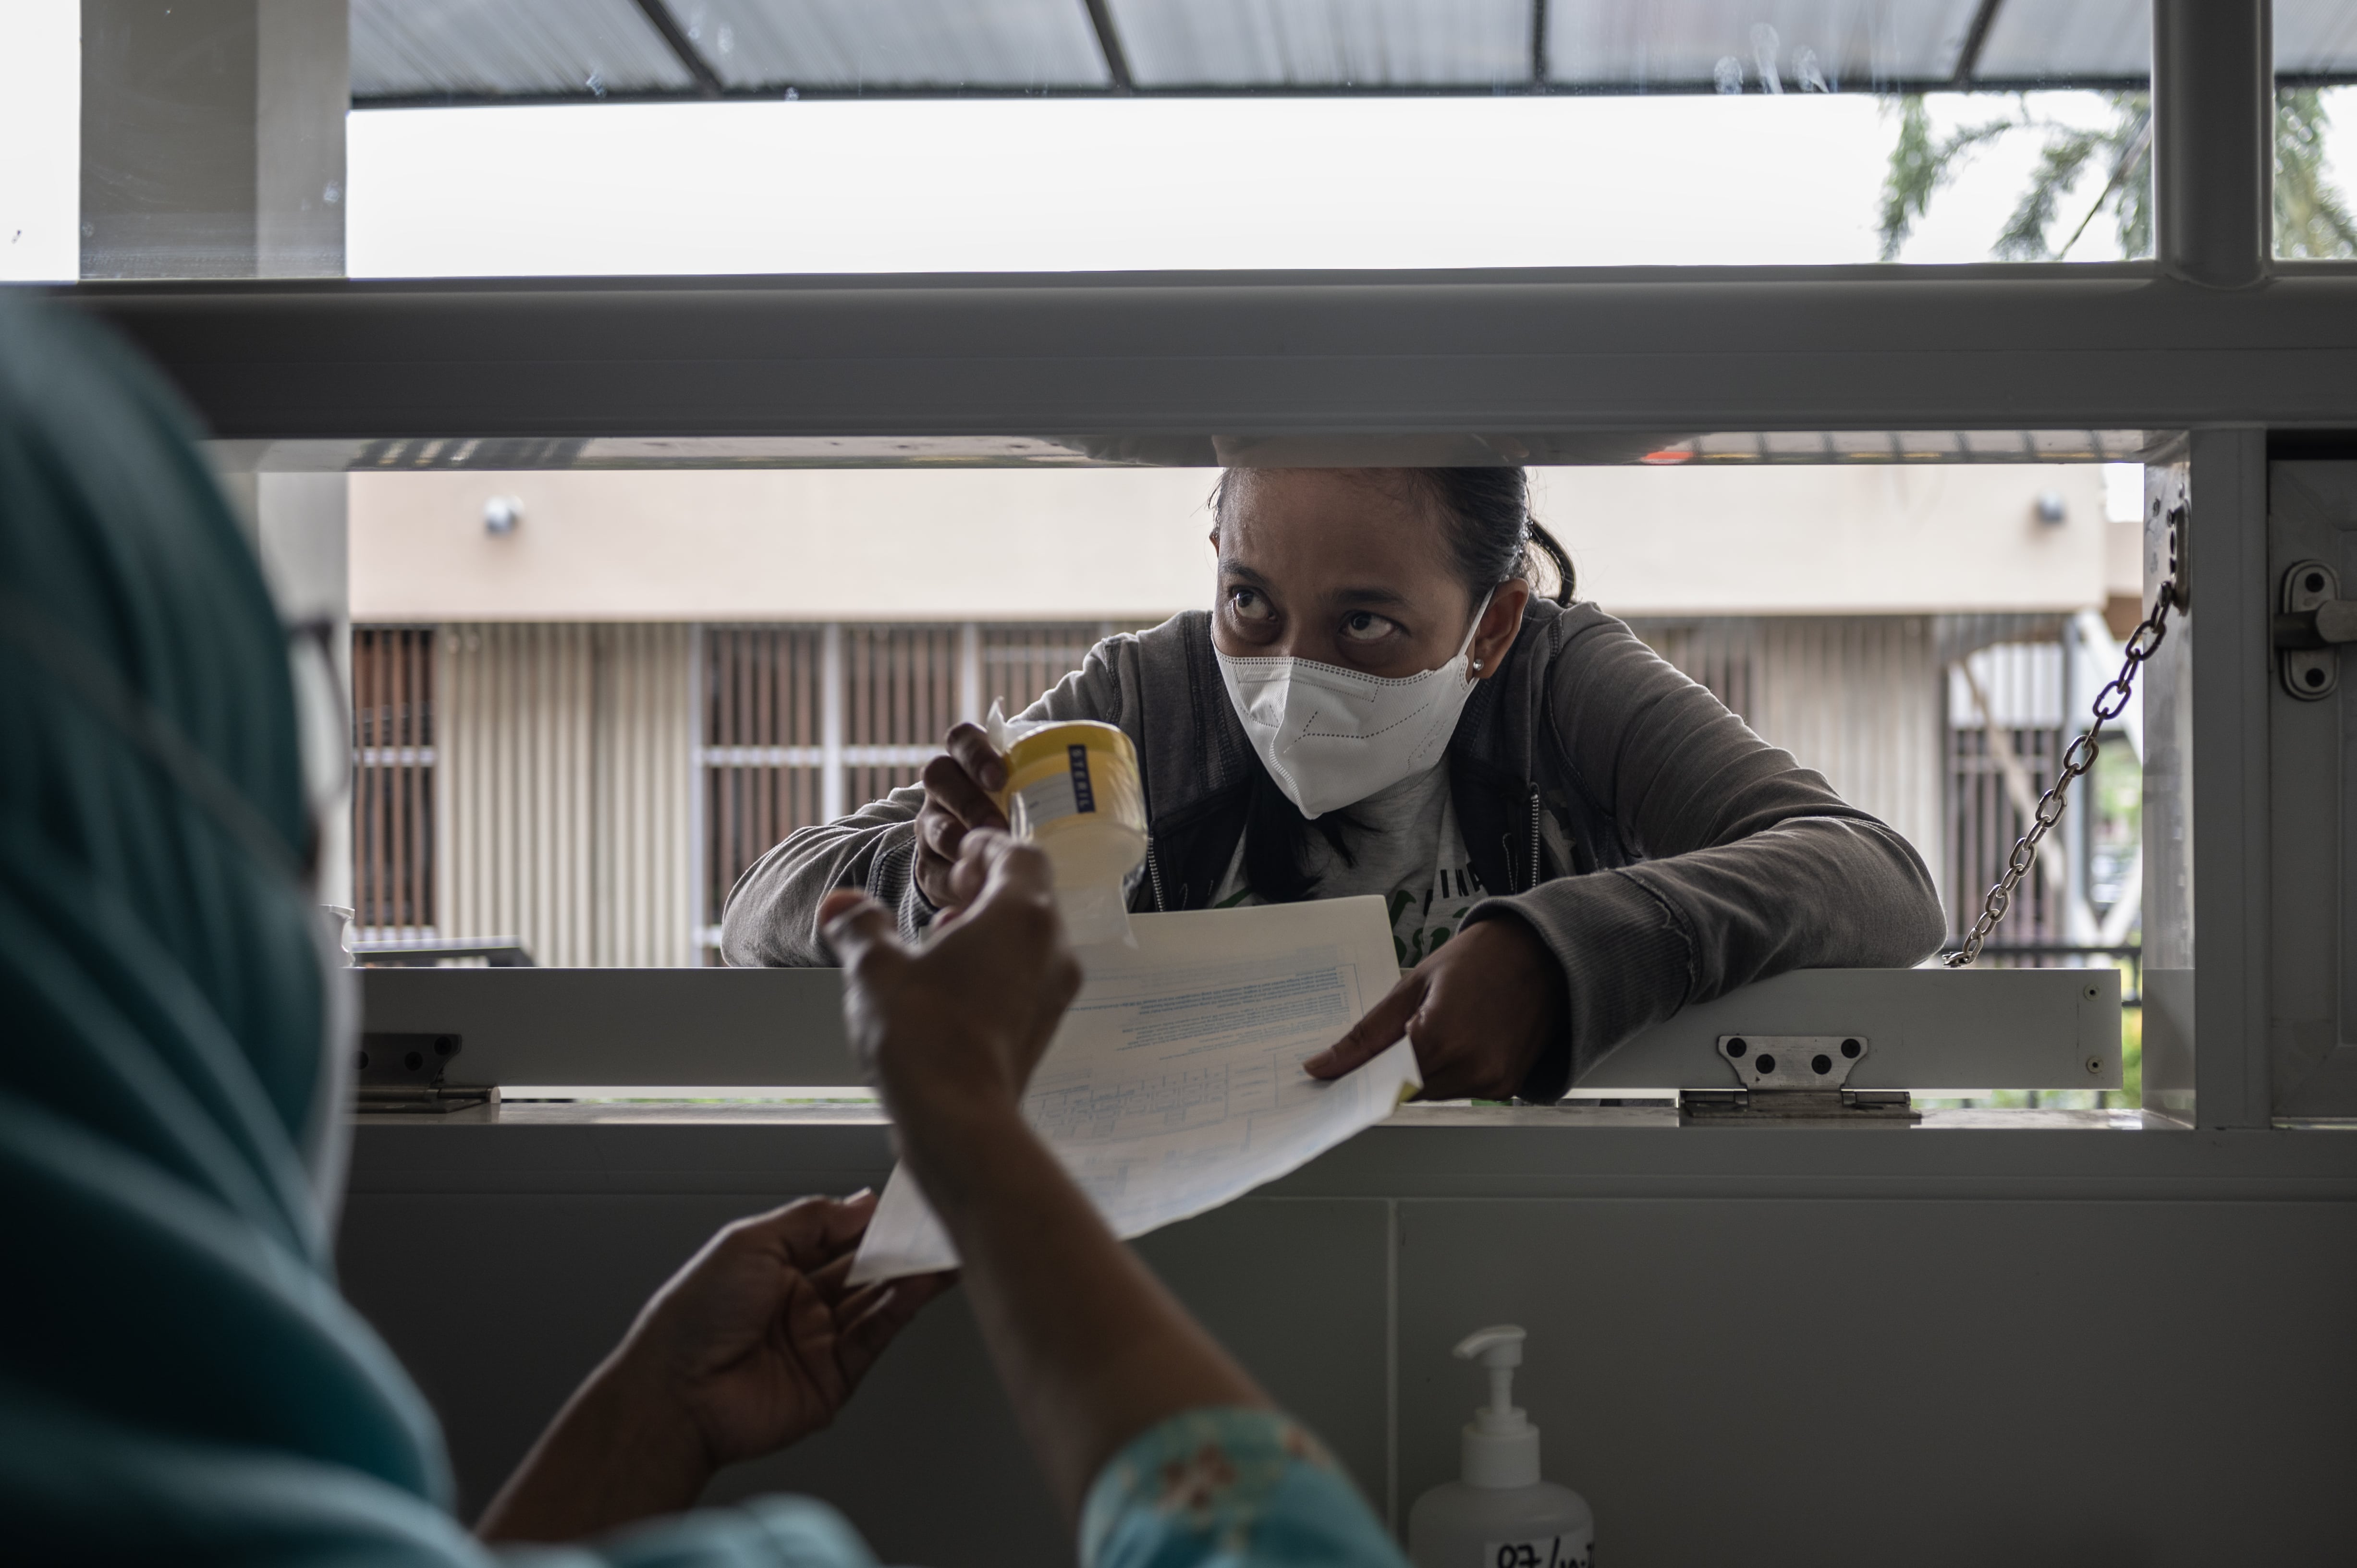 Paran, a survivor of drug-resistant TB, wearing a medical mask taking a form at a service window.